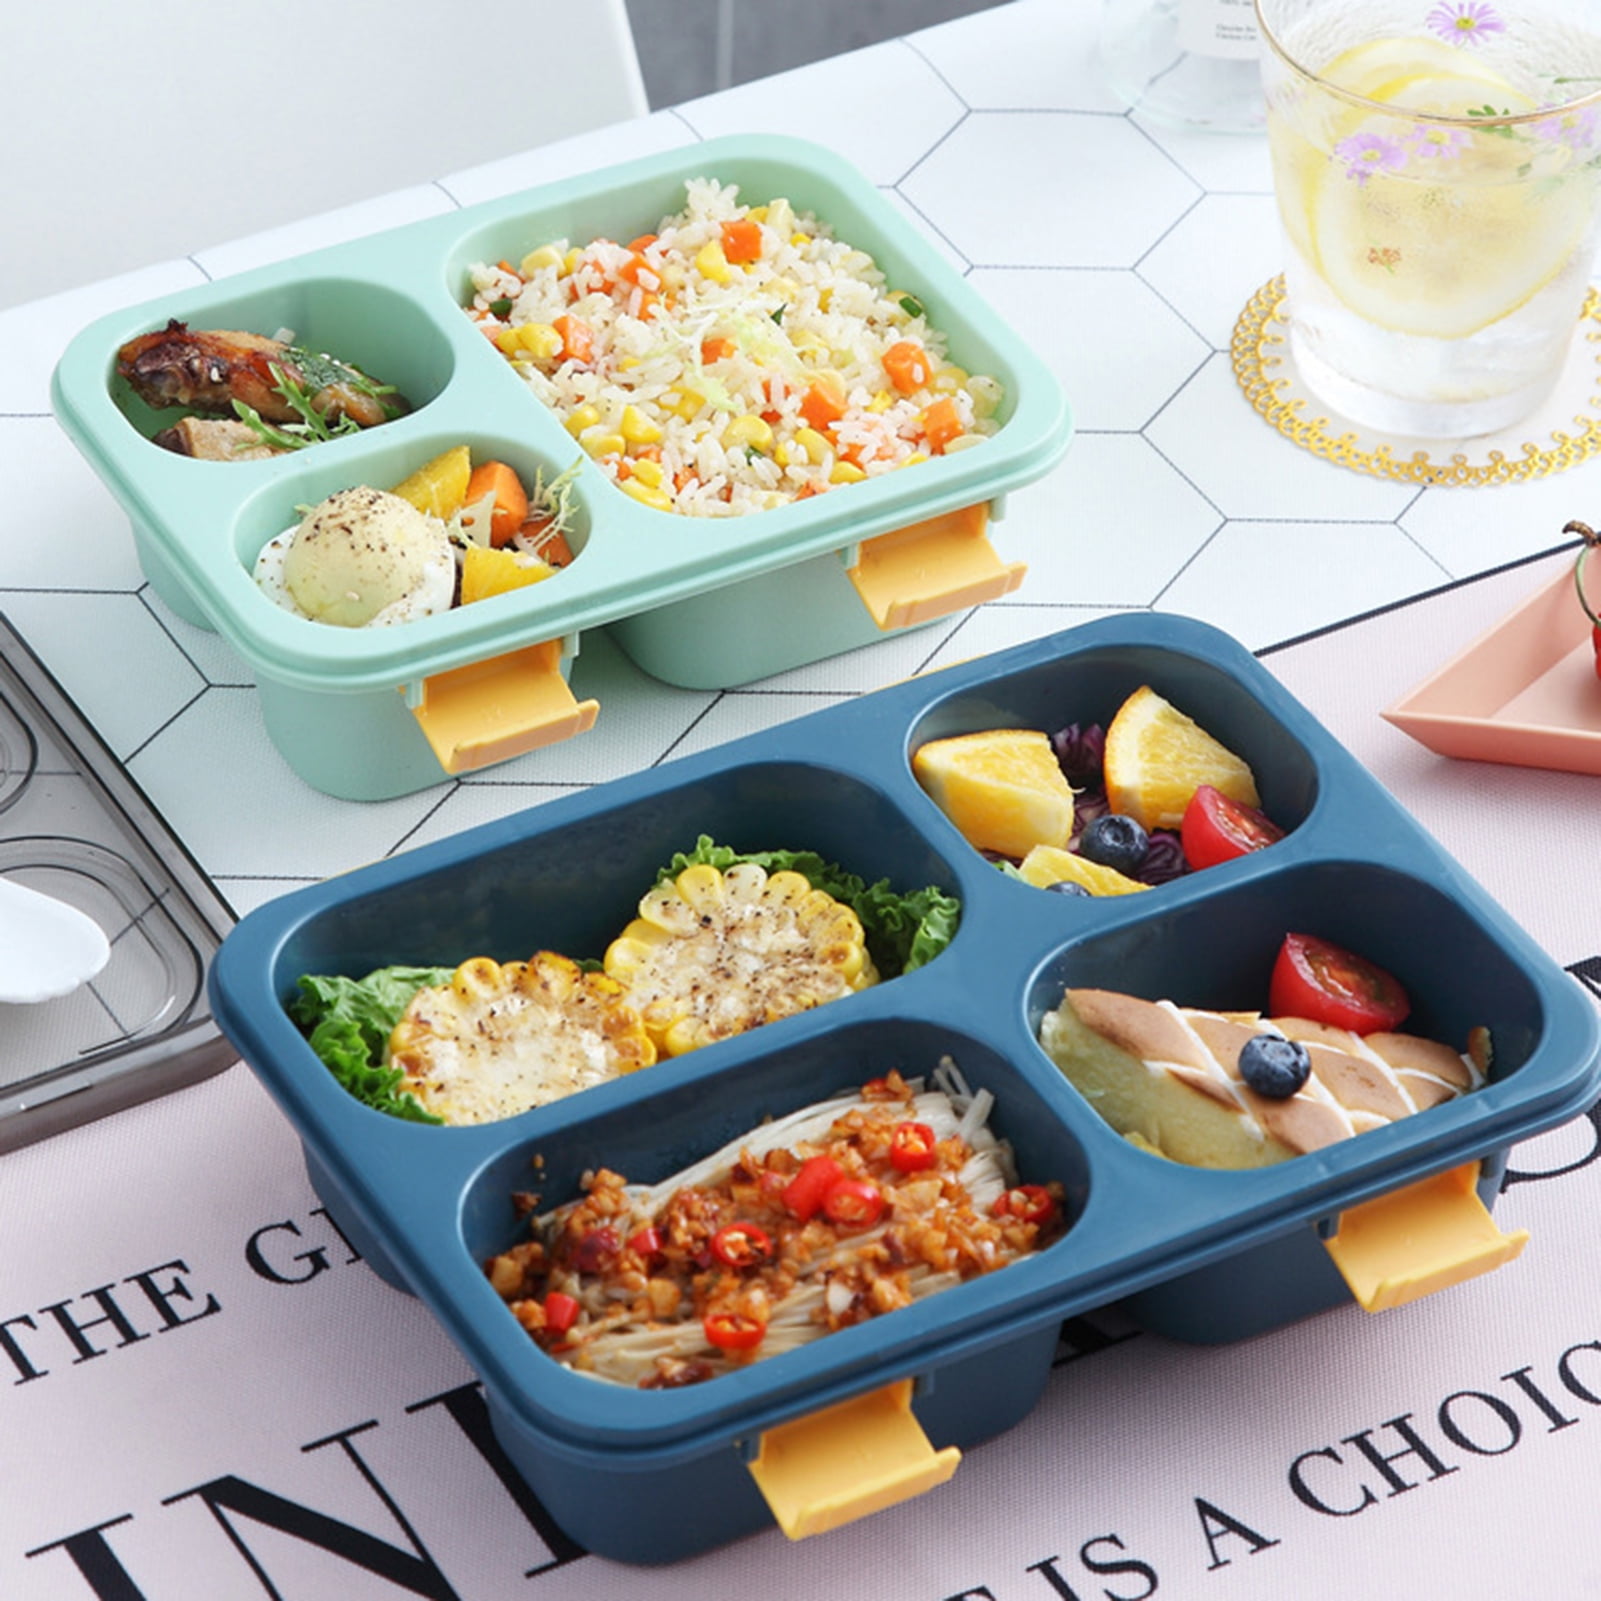 ArderLive Stackable Lunch Bento Box with Bag and Utensils, Microwave Safe,  BPA-Free Eco-Friendly Lun…See more ArderLive Stackable Lunch Bento Box with